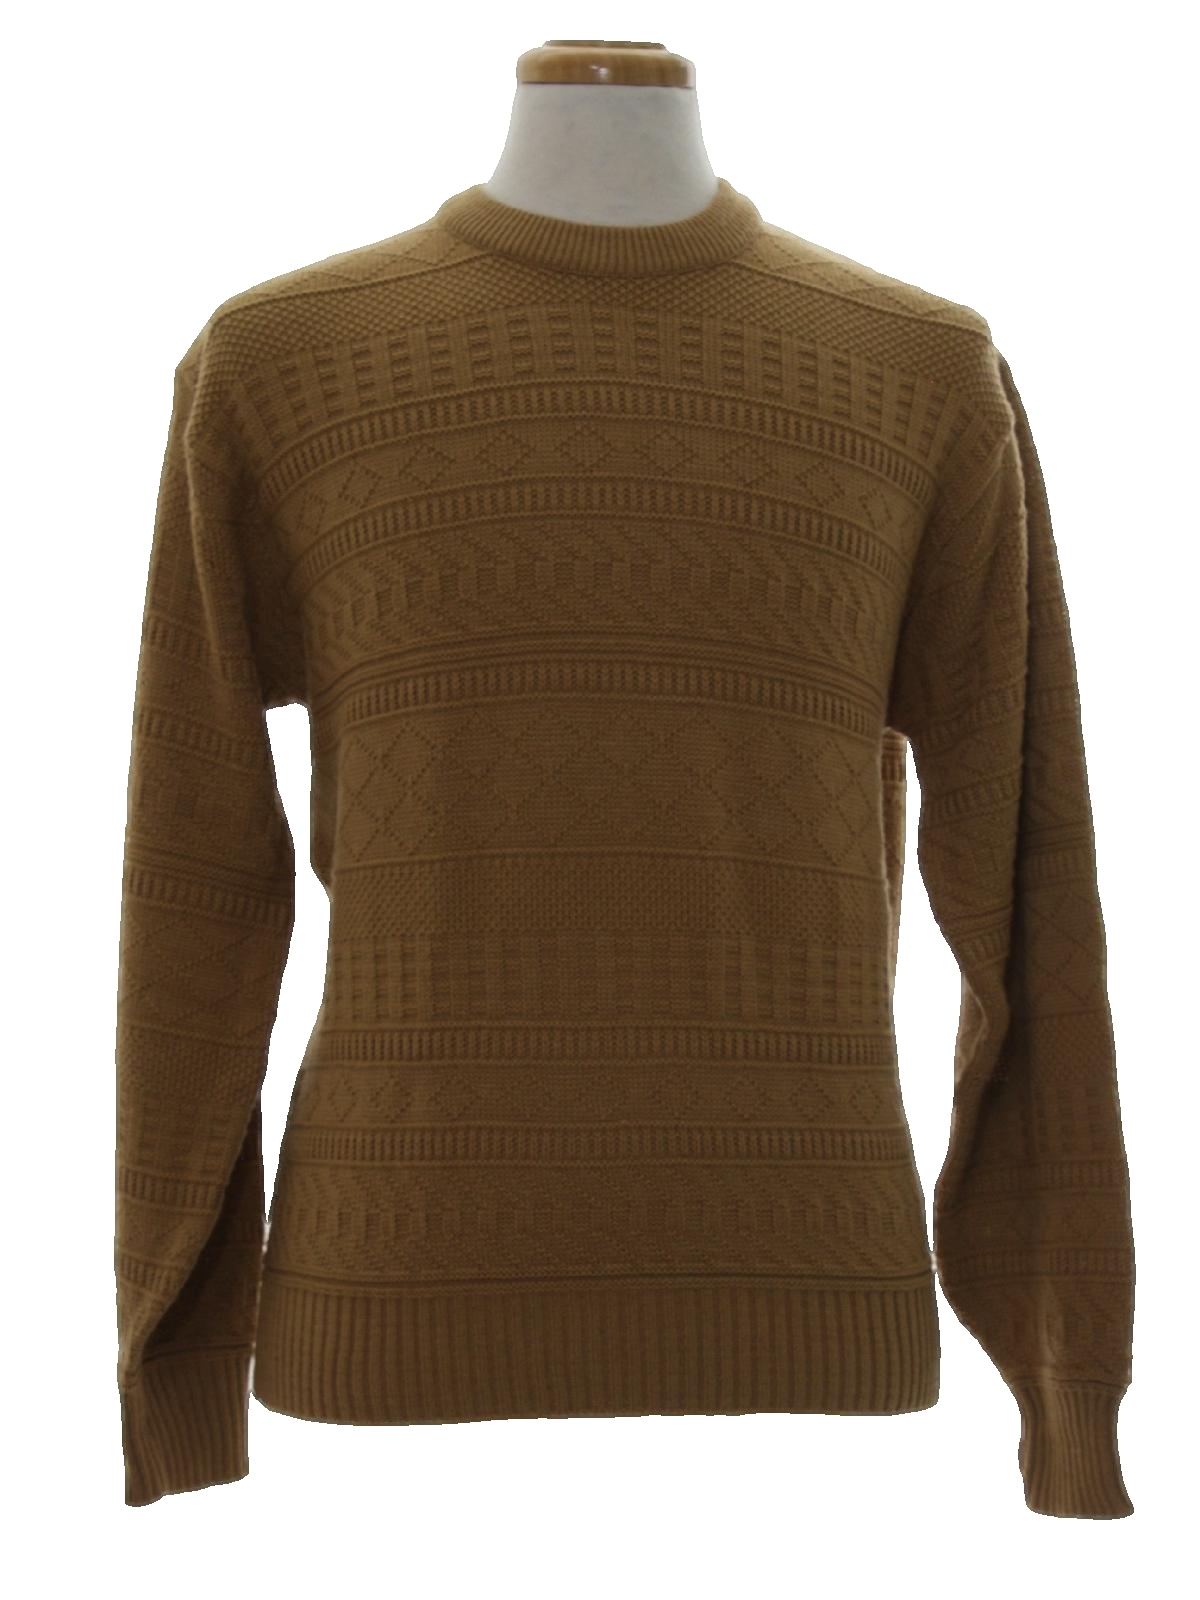 Vintage 1980's Sweater: 80s -Expressions- Mens camel colored background ...